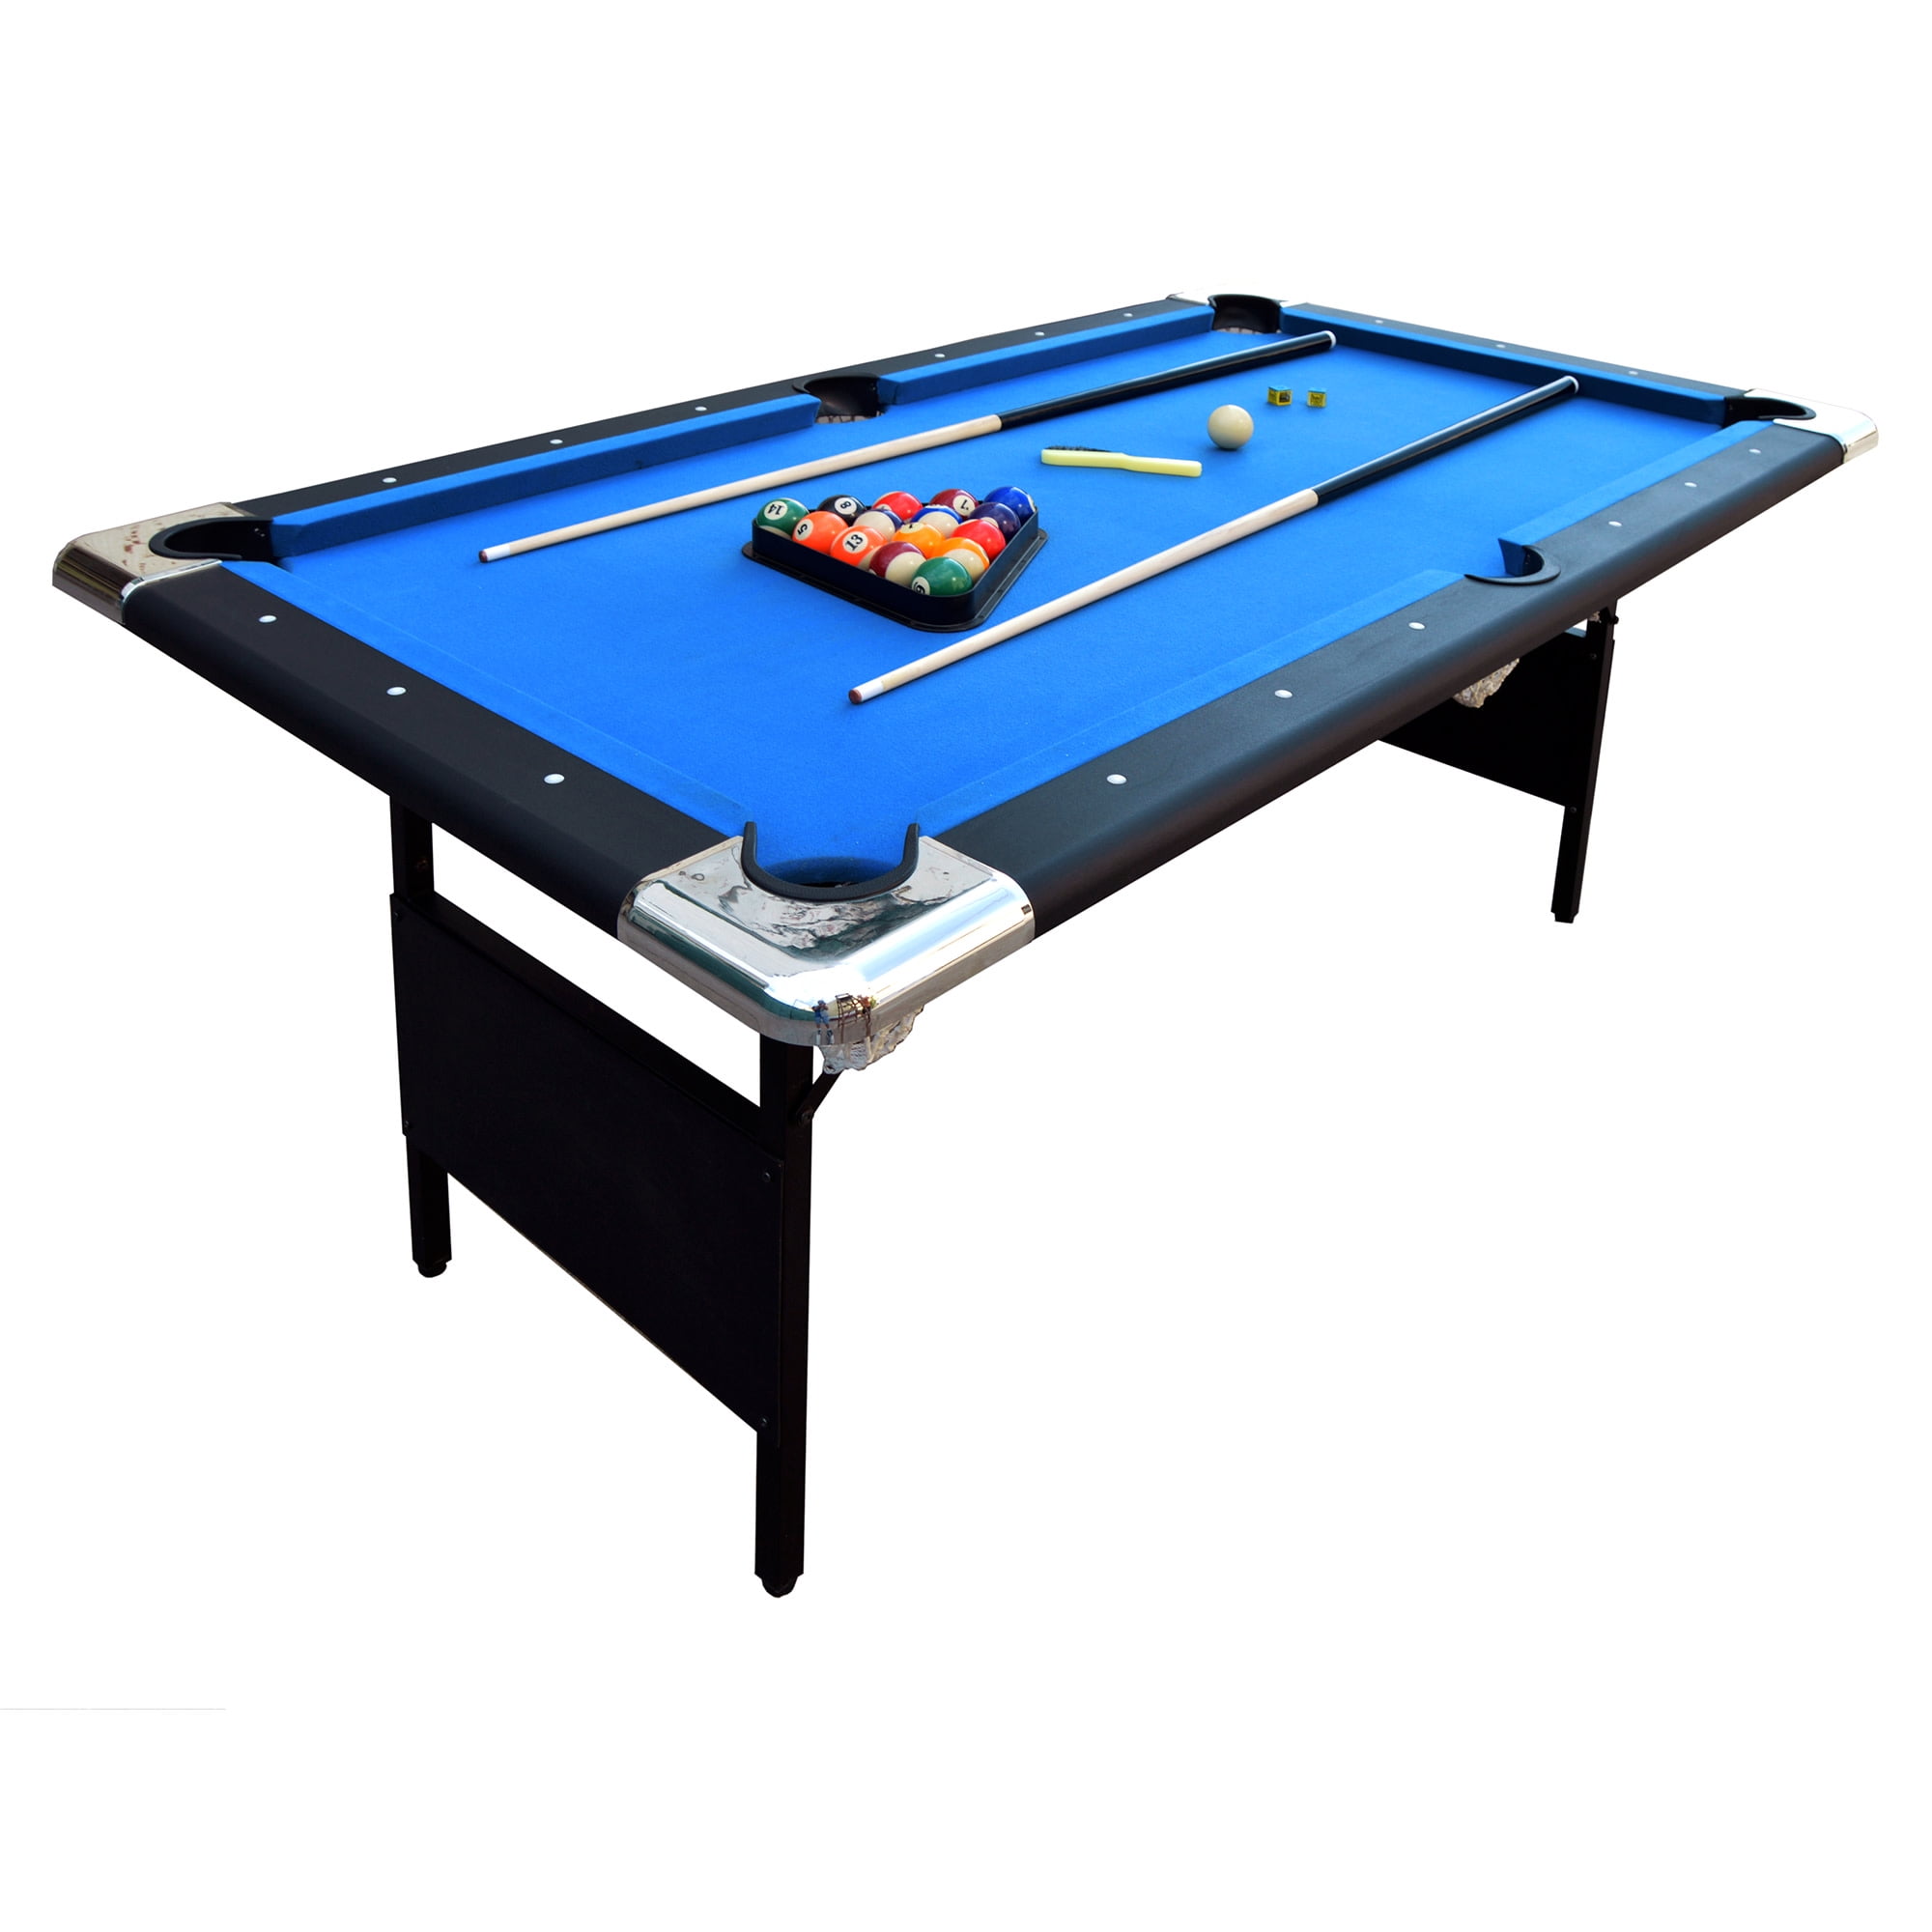 6ft Pool Table Cover spots+stripes ball design 